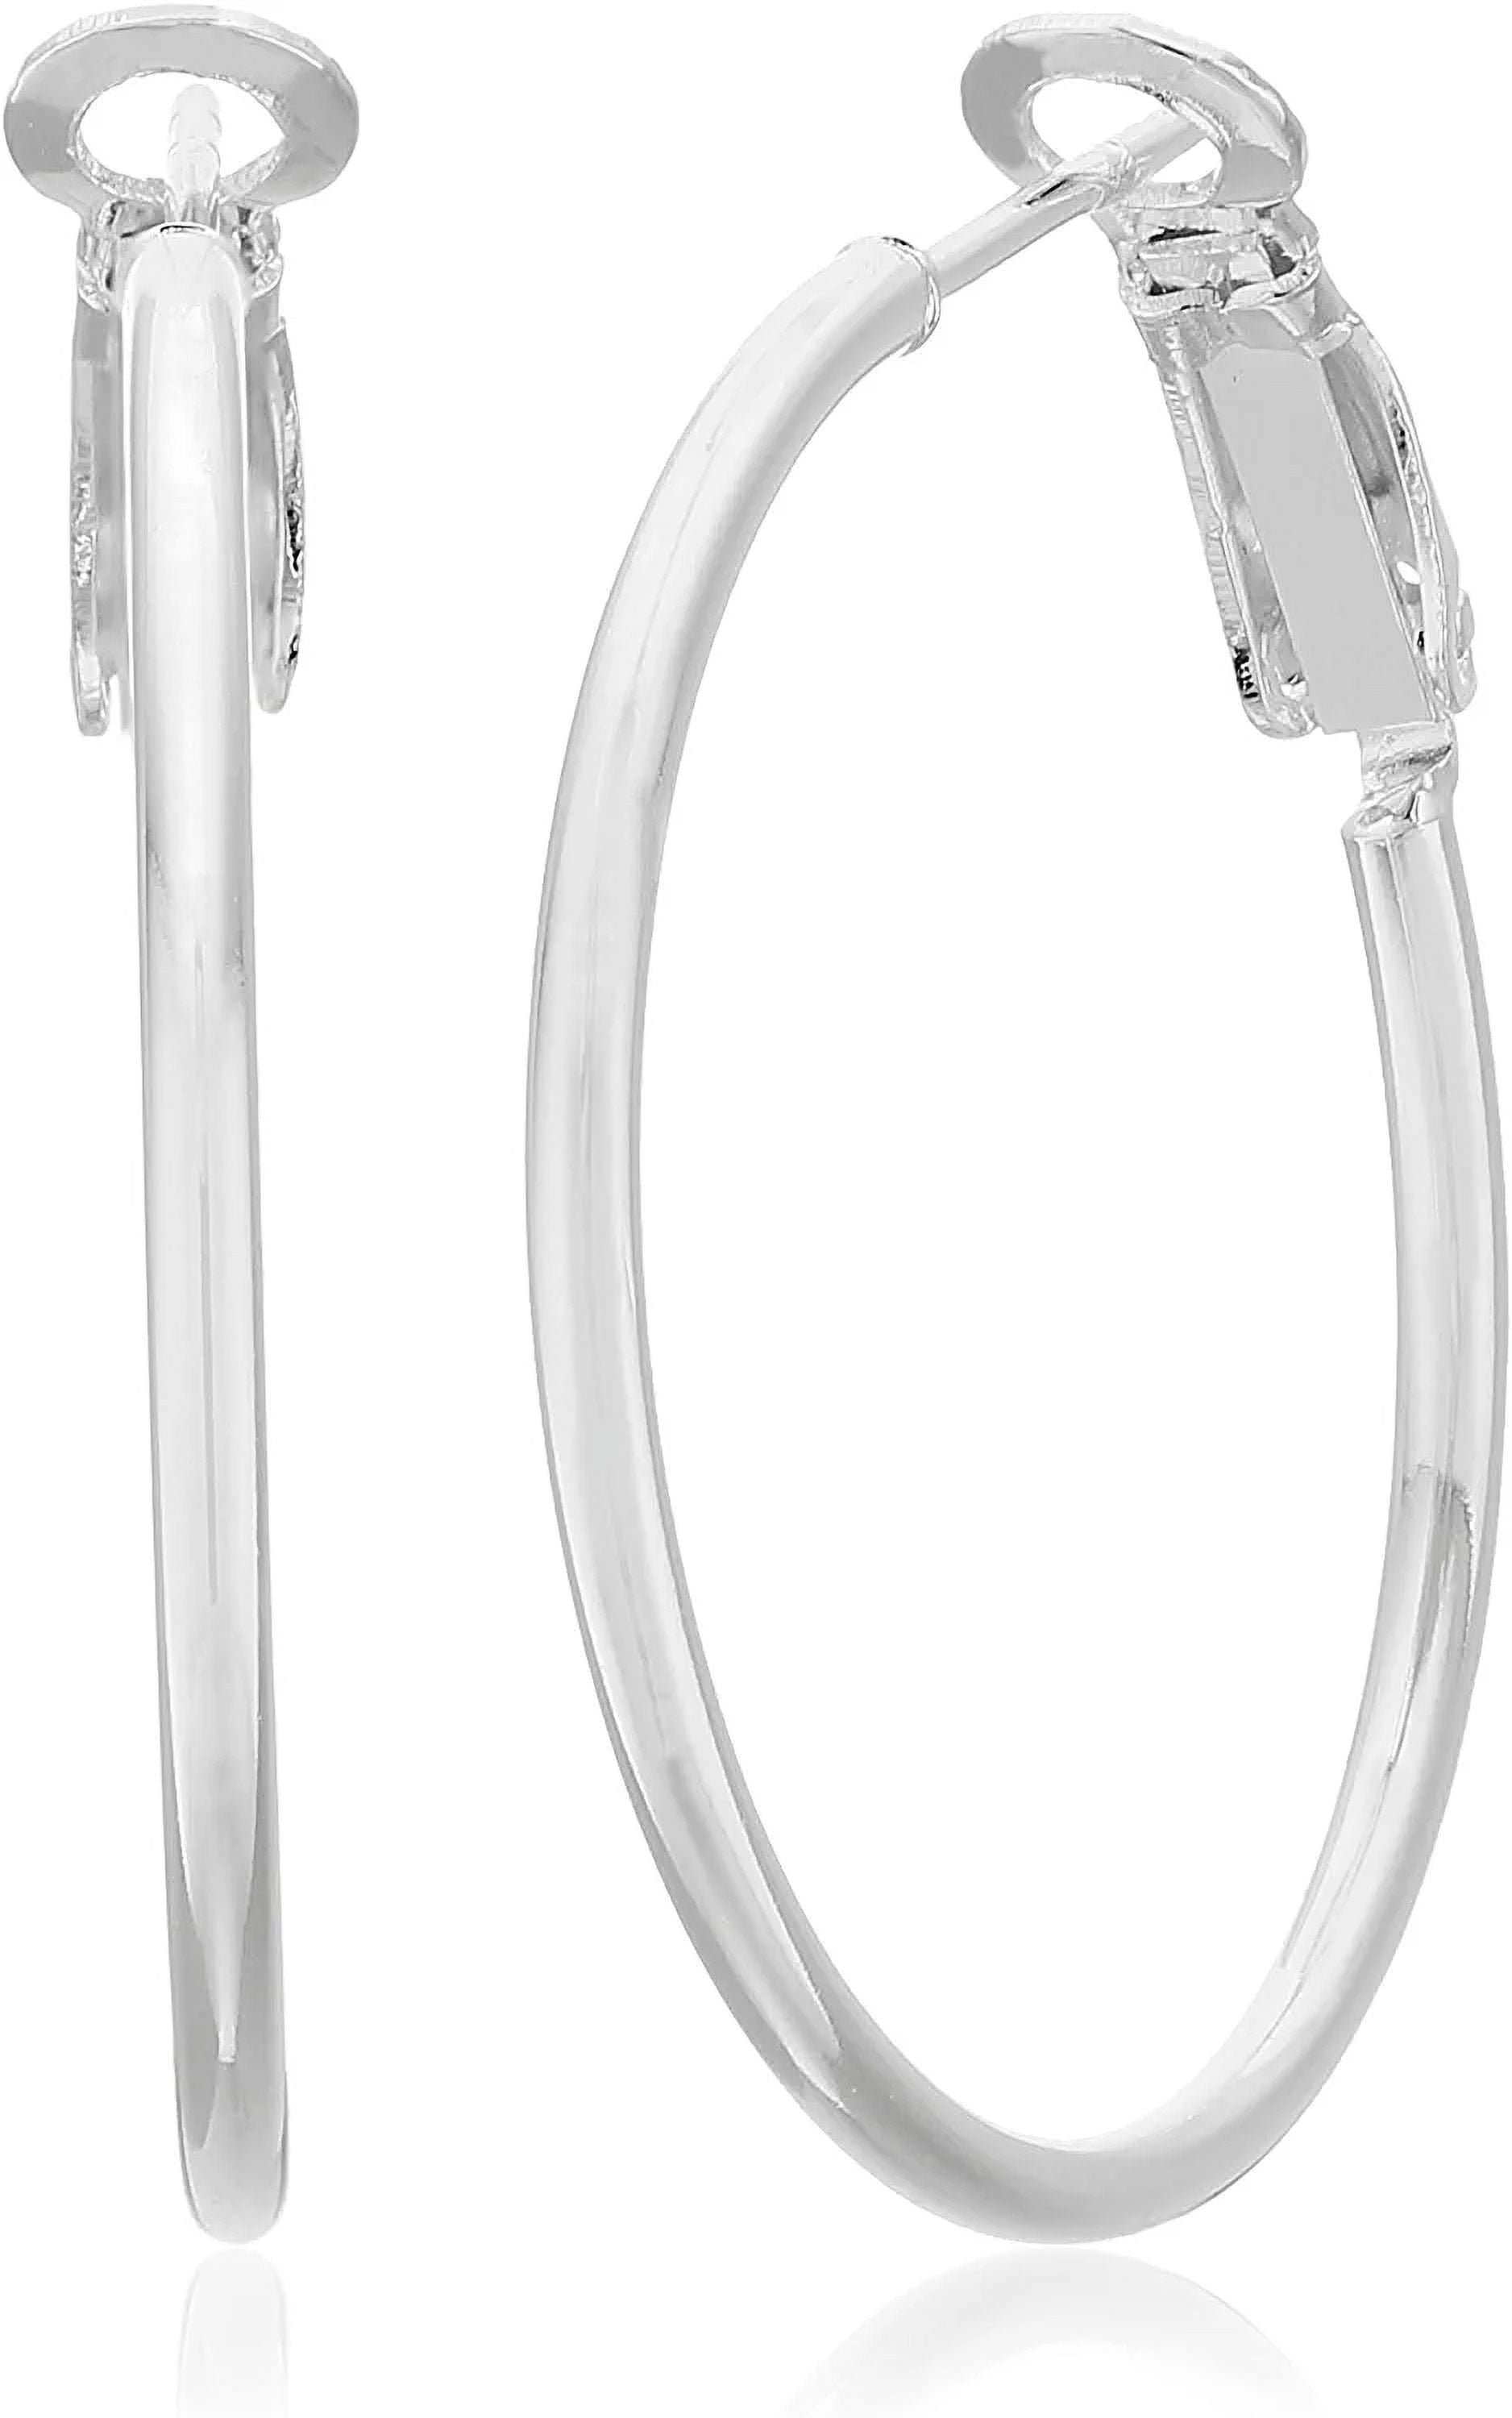 Set of 6 Chic Silver Stud and Hoop Earrings Combo – www.pipabella.com